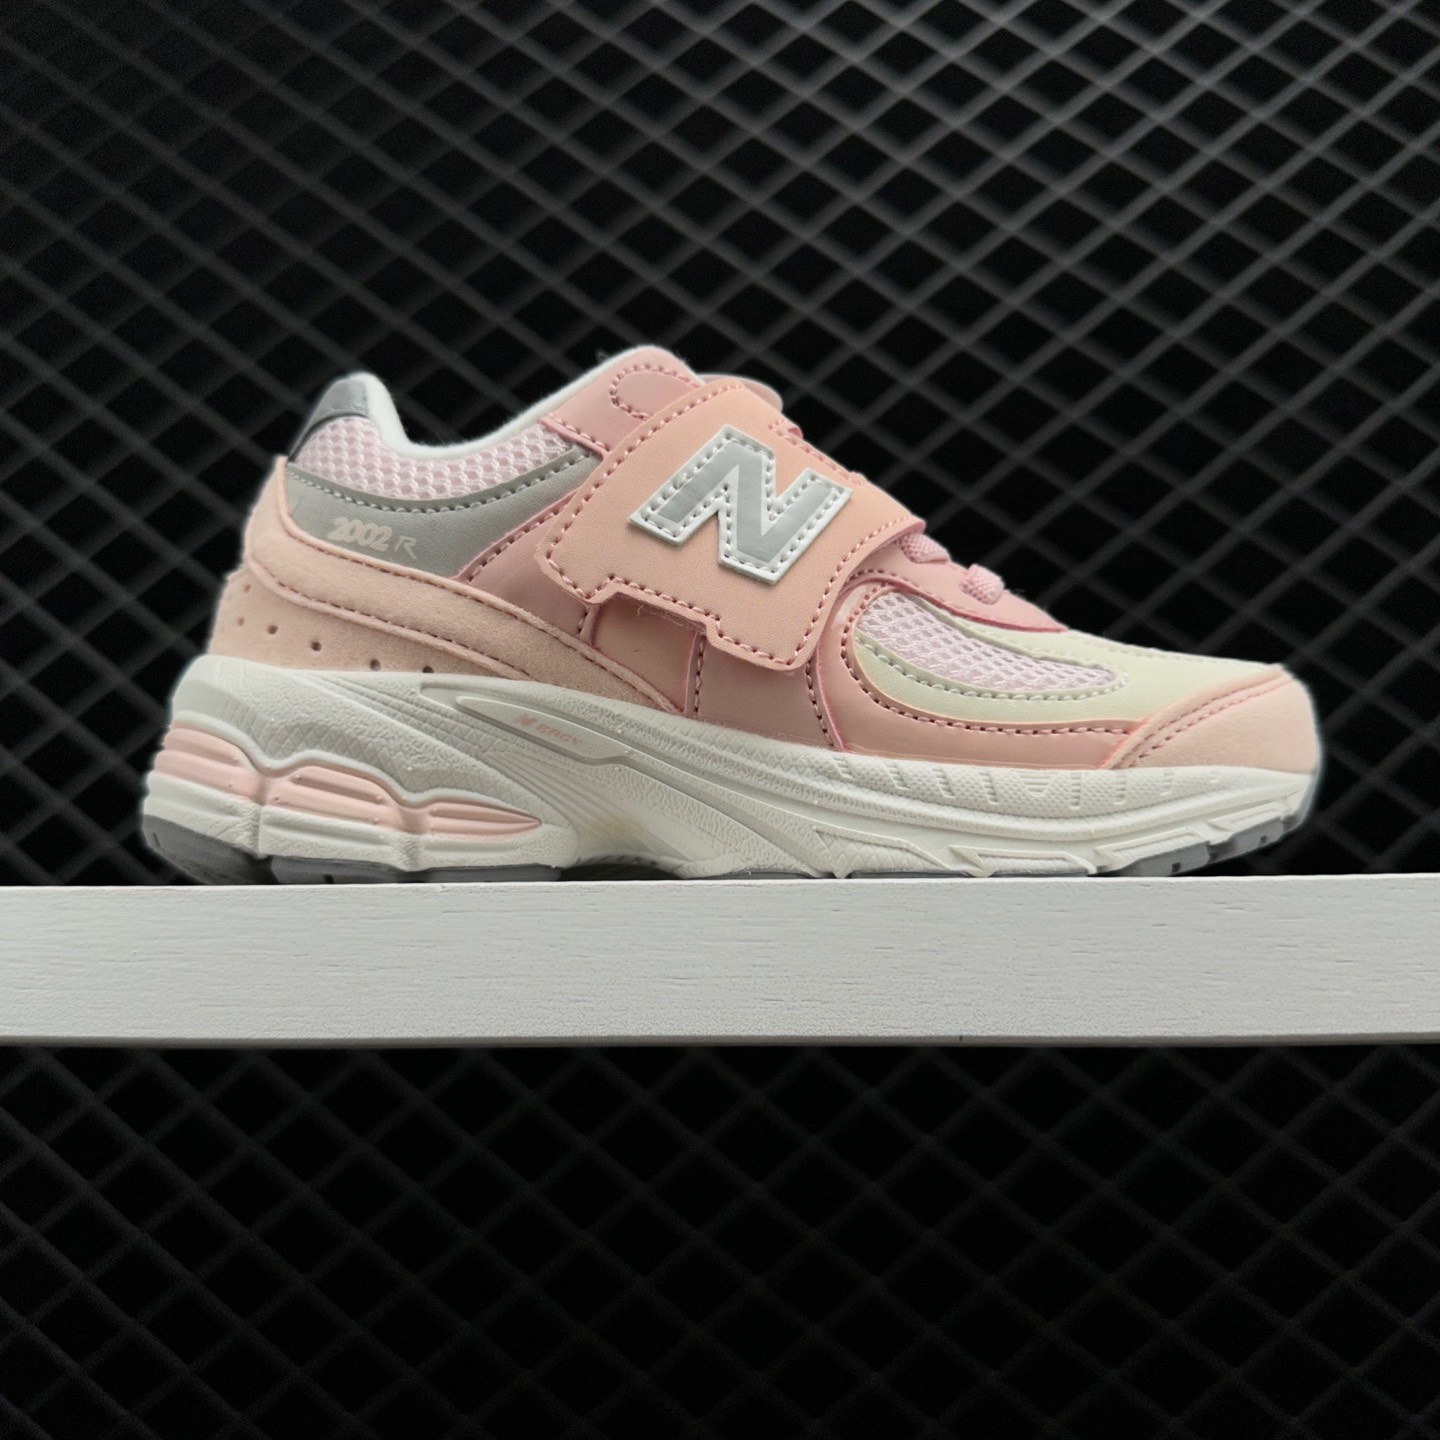 New Balance 2002R Kids Sneaker Pink White - Stylish and Comfortable Footwear